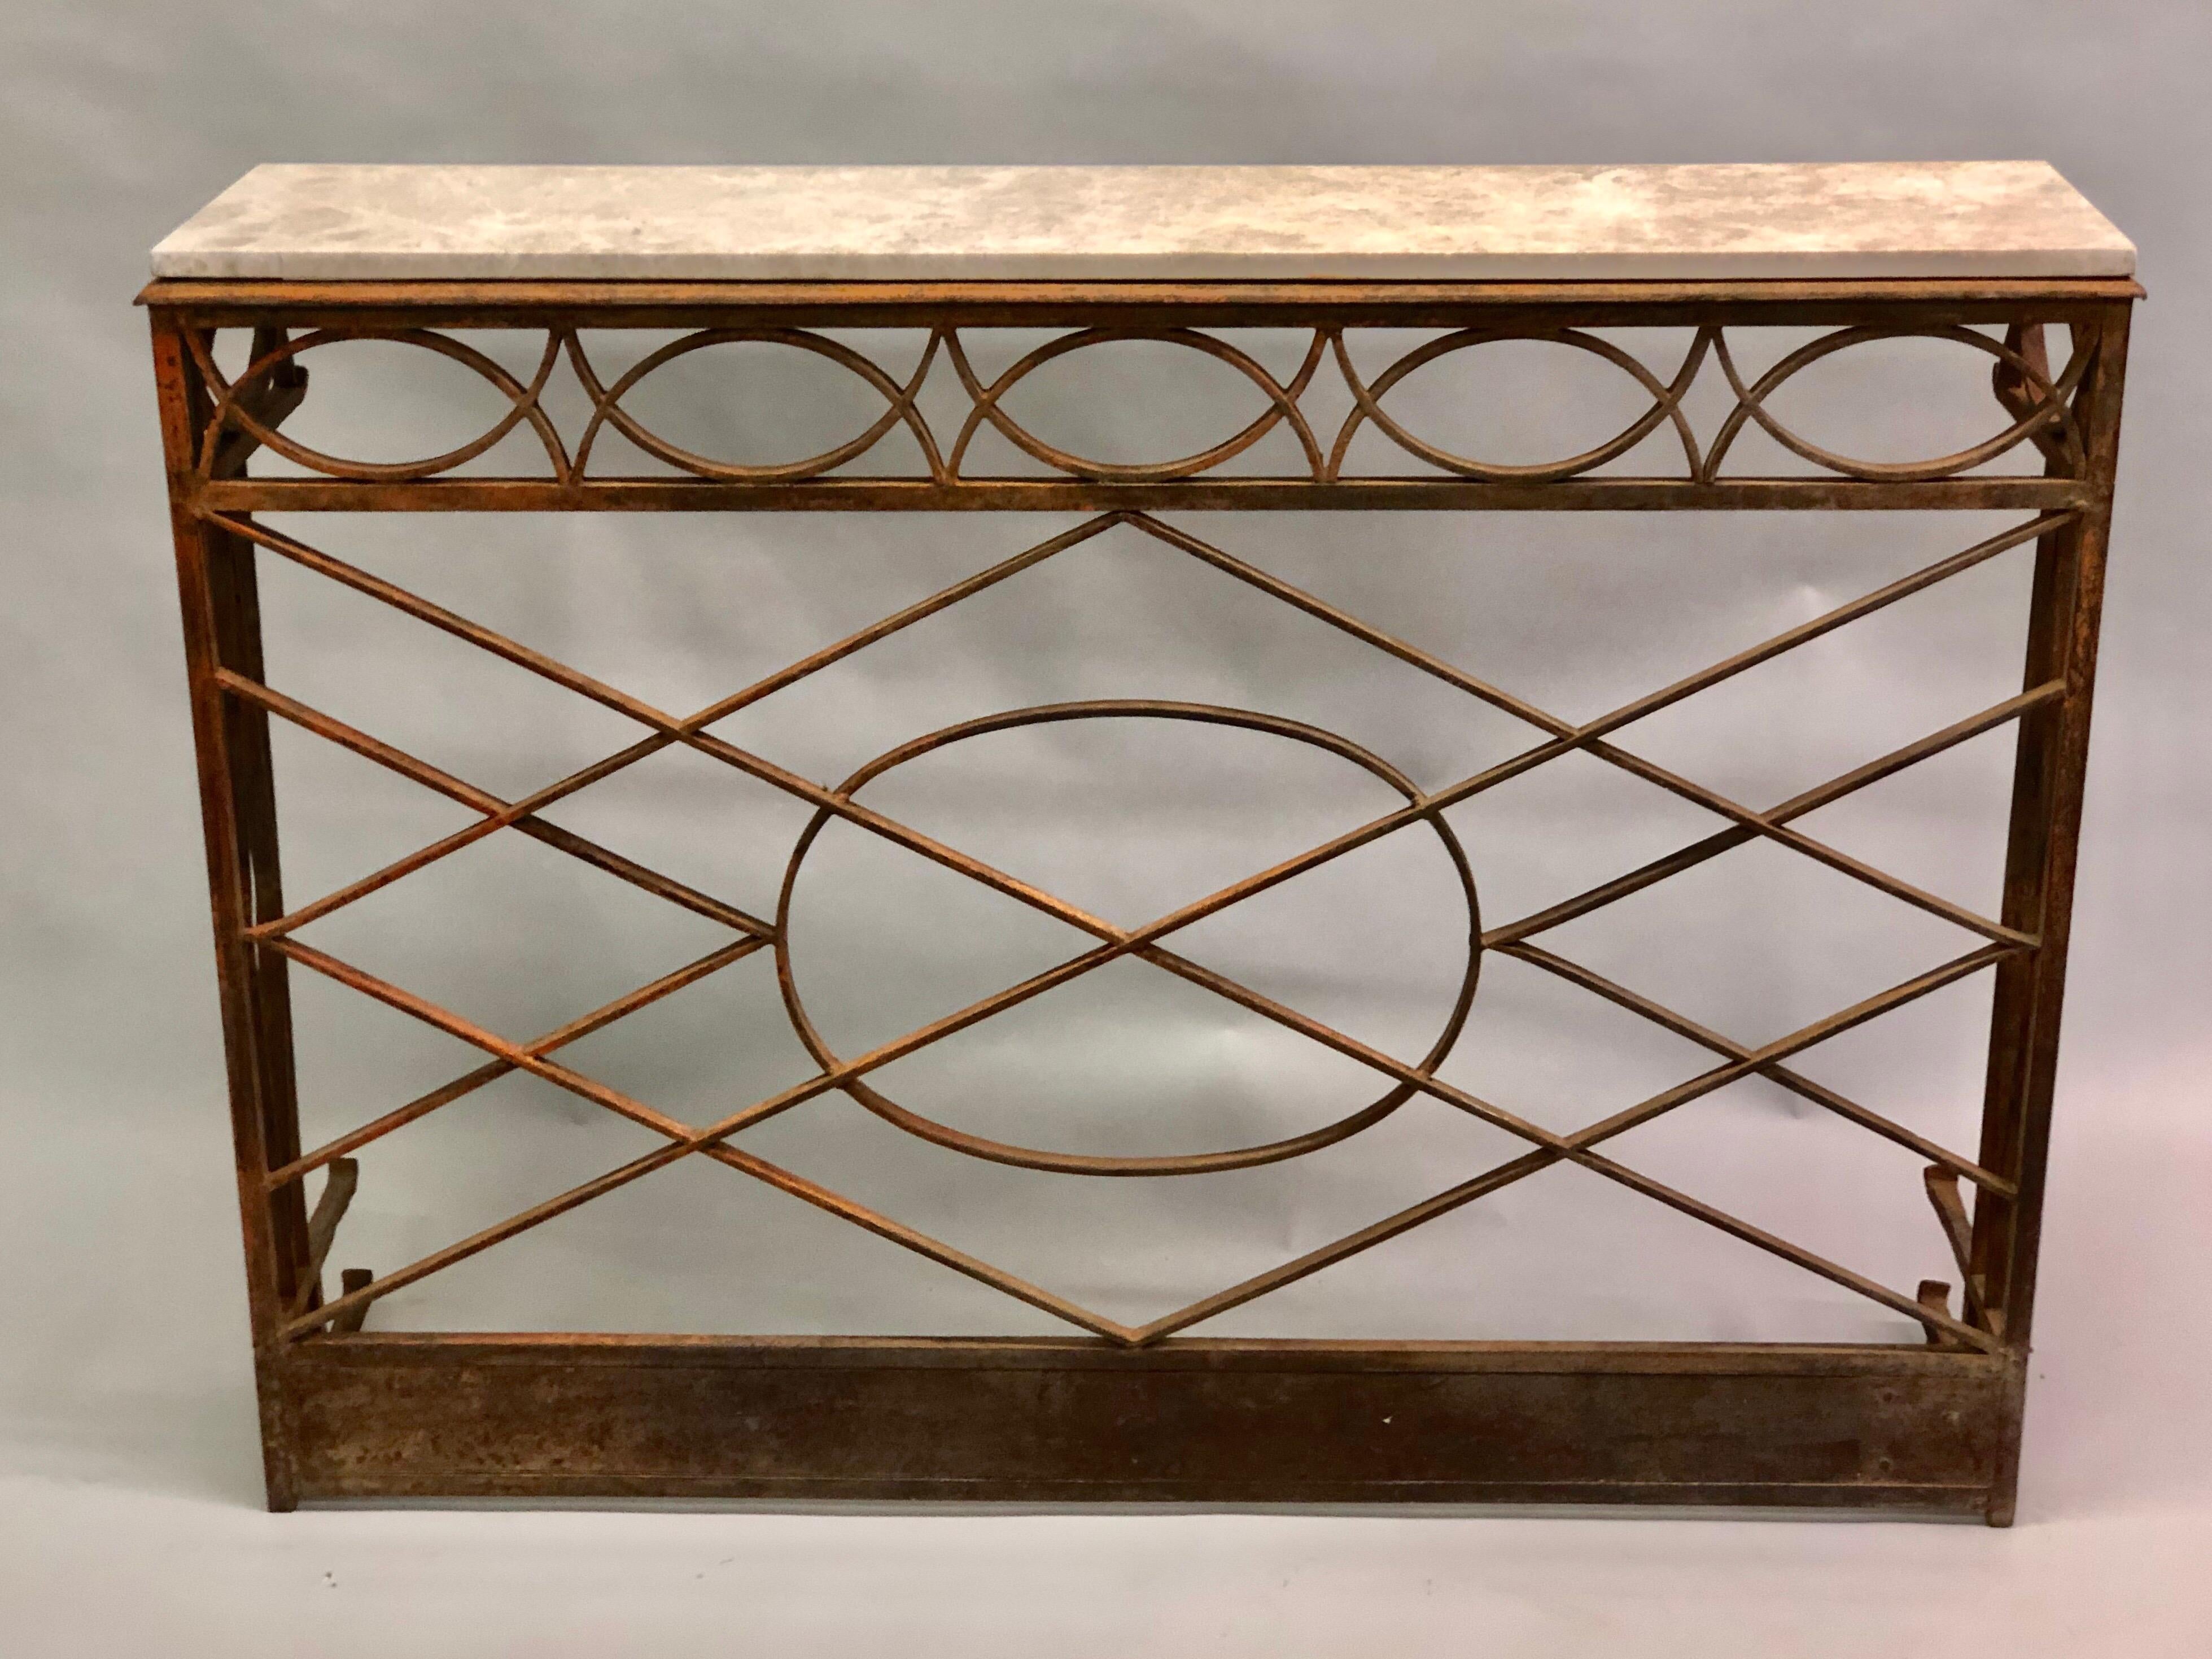 Neoclassical Revival French Modern Neoclassical Wrought Iron and Limestone Console, circa 1860-1880 For Sale